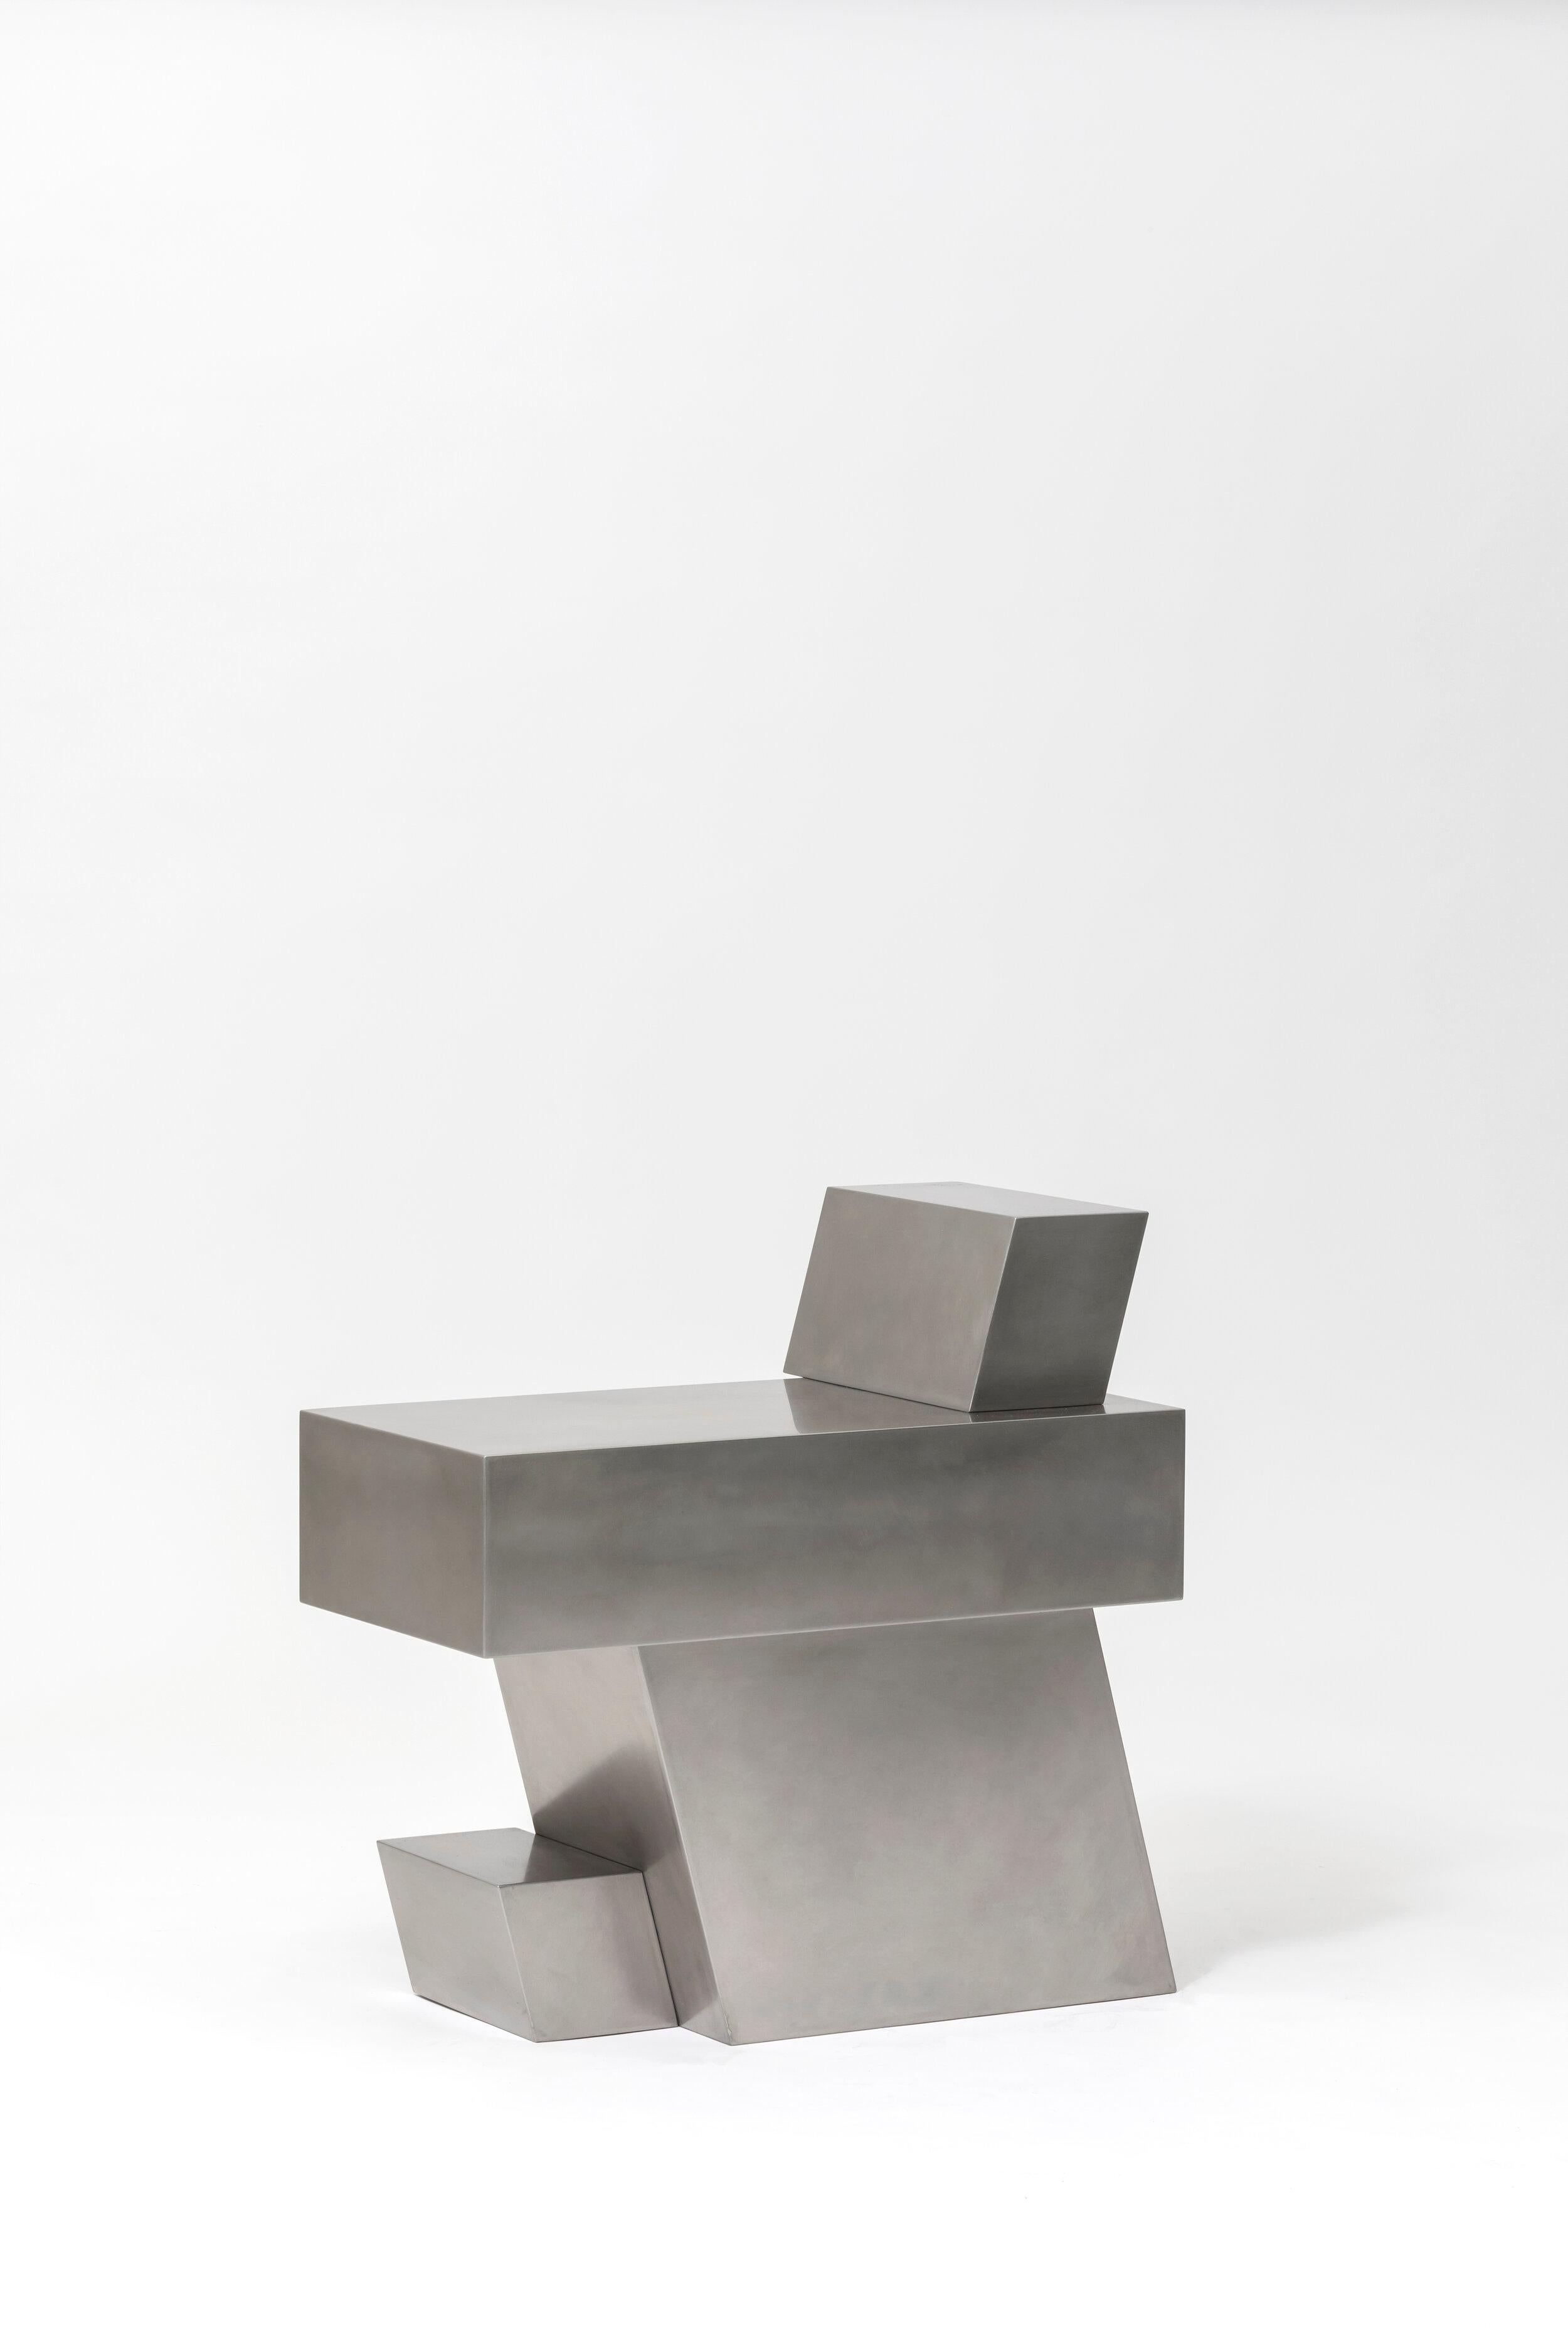 Layered steel seat XVI by Hyungshin Hwang.
Dimensions: D 33 x W 54 x H 54 cm.
Materials: stainless steel.

Layered Series is the main theme and concept of work of Hwang, who continues his experiment which is based on architectural composition of